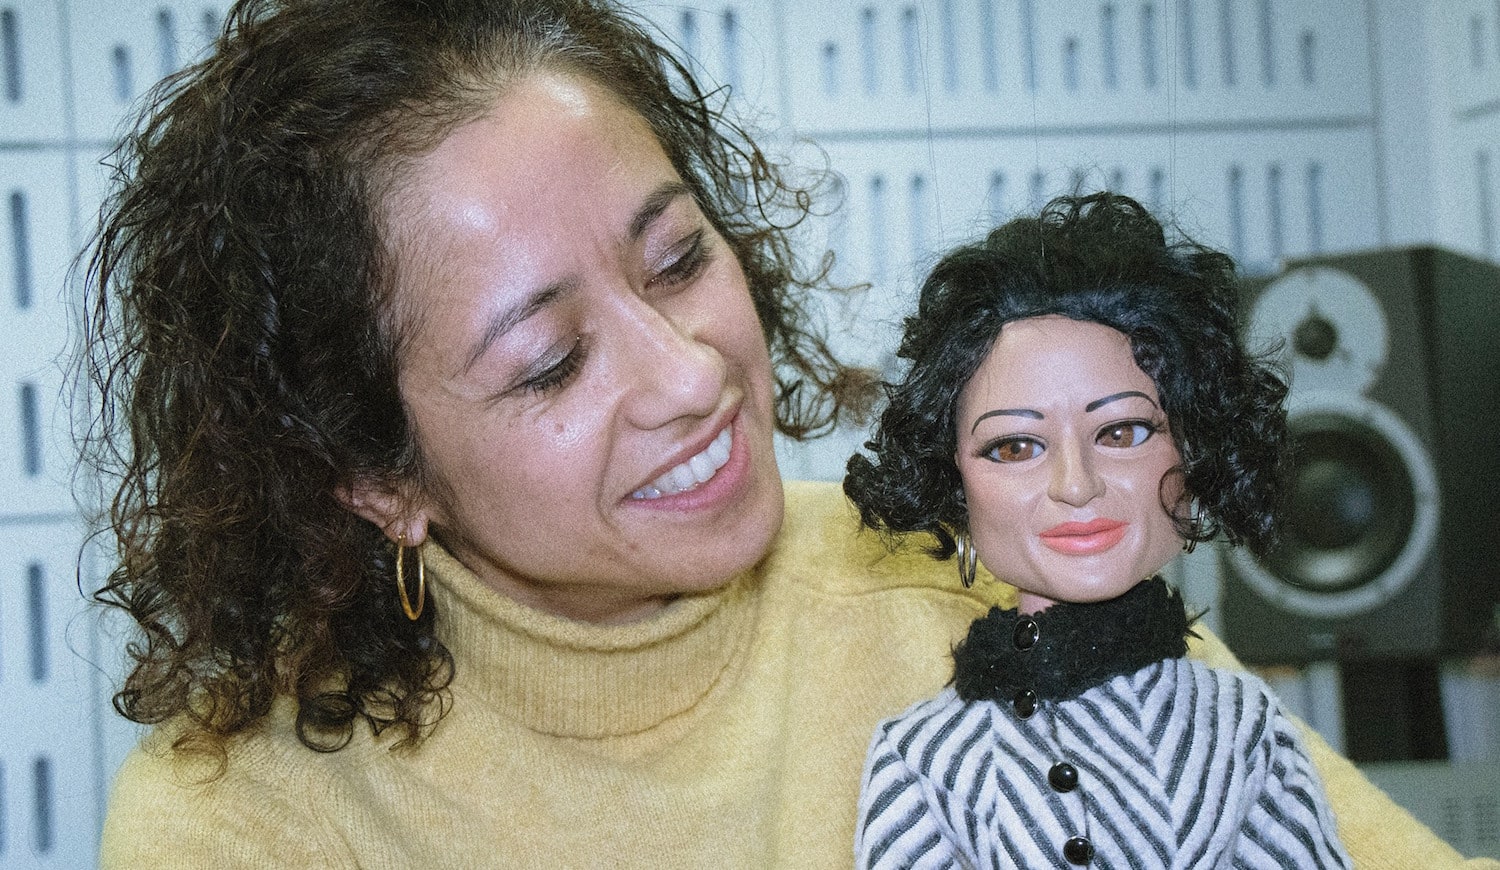 SOCIALLY ISOLATED FILMMAKERS CAST JOURNALIST SAMIRA AHMED IN RETRO "SUPERMARIONATION" CHRISTMAS SPECIAL